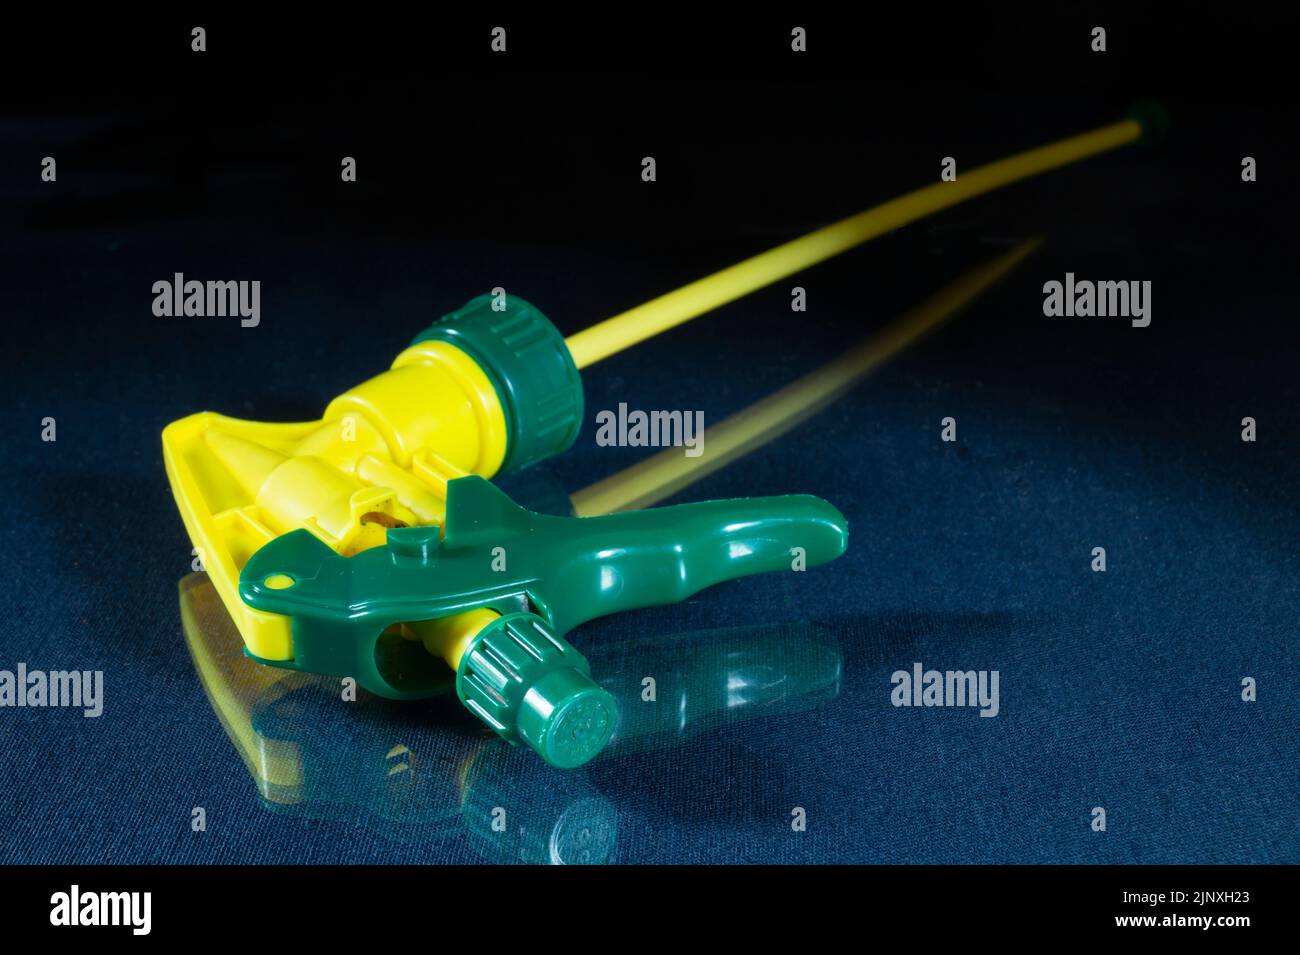 Garden tools on a black background. Plastic tool close-up. A device for spraying in the garden Stock Photo